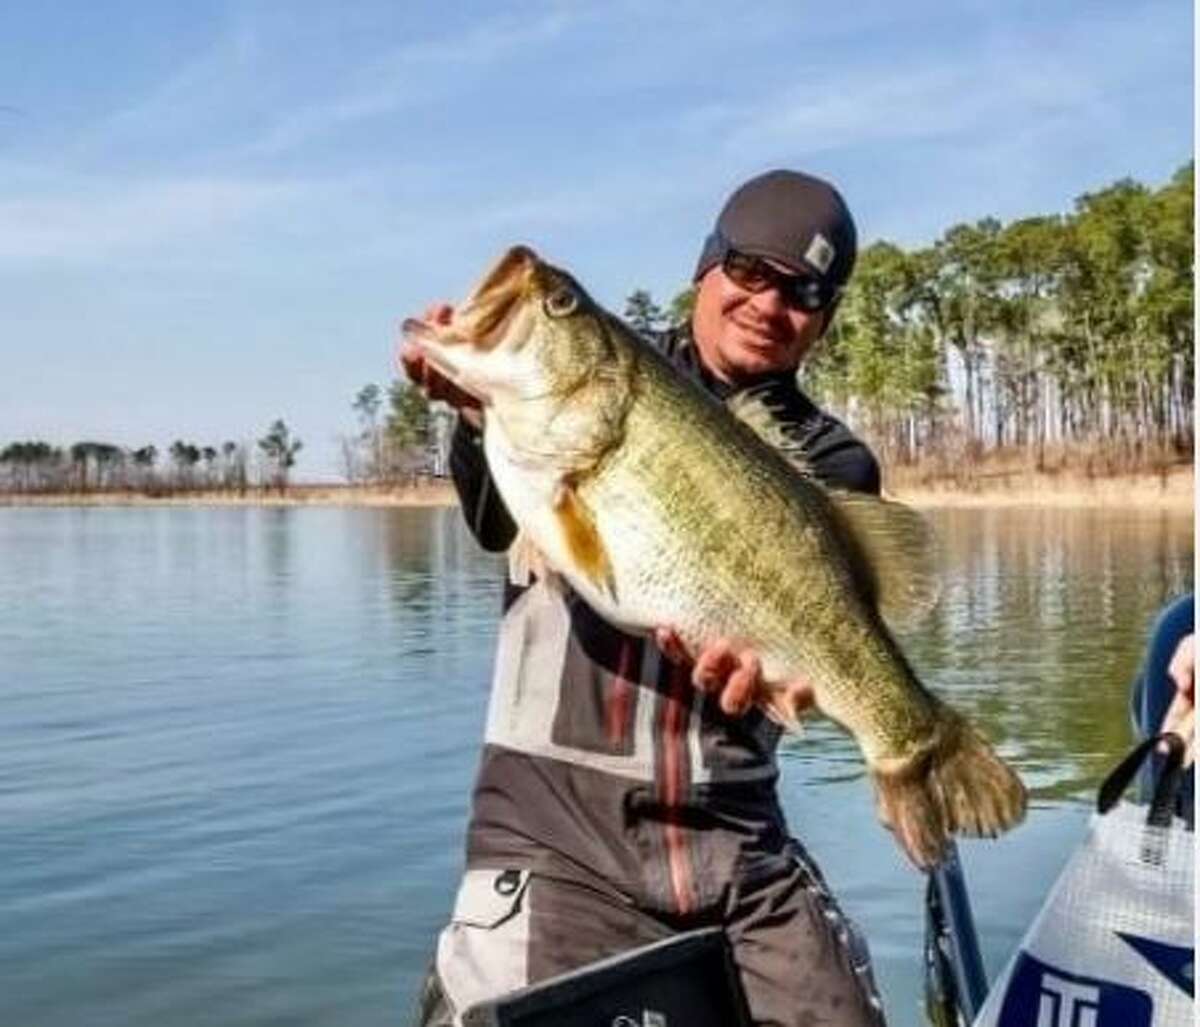 On Friday, angler Derek Mundy, from Broaddus, landed a 13.62-pounder during the Toyota Series Southwestern Division tournament on Sam Rayburn Reservoir, which is 70 miles north of Beaumont.